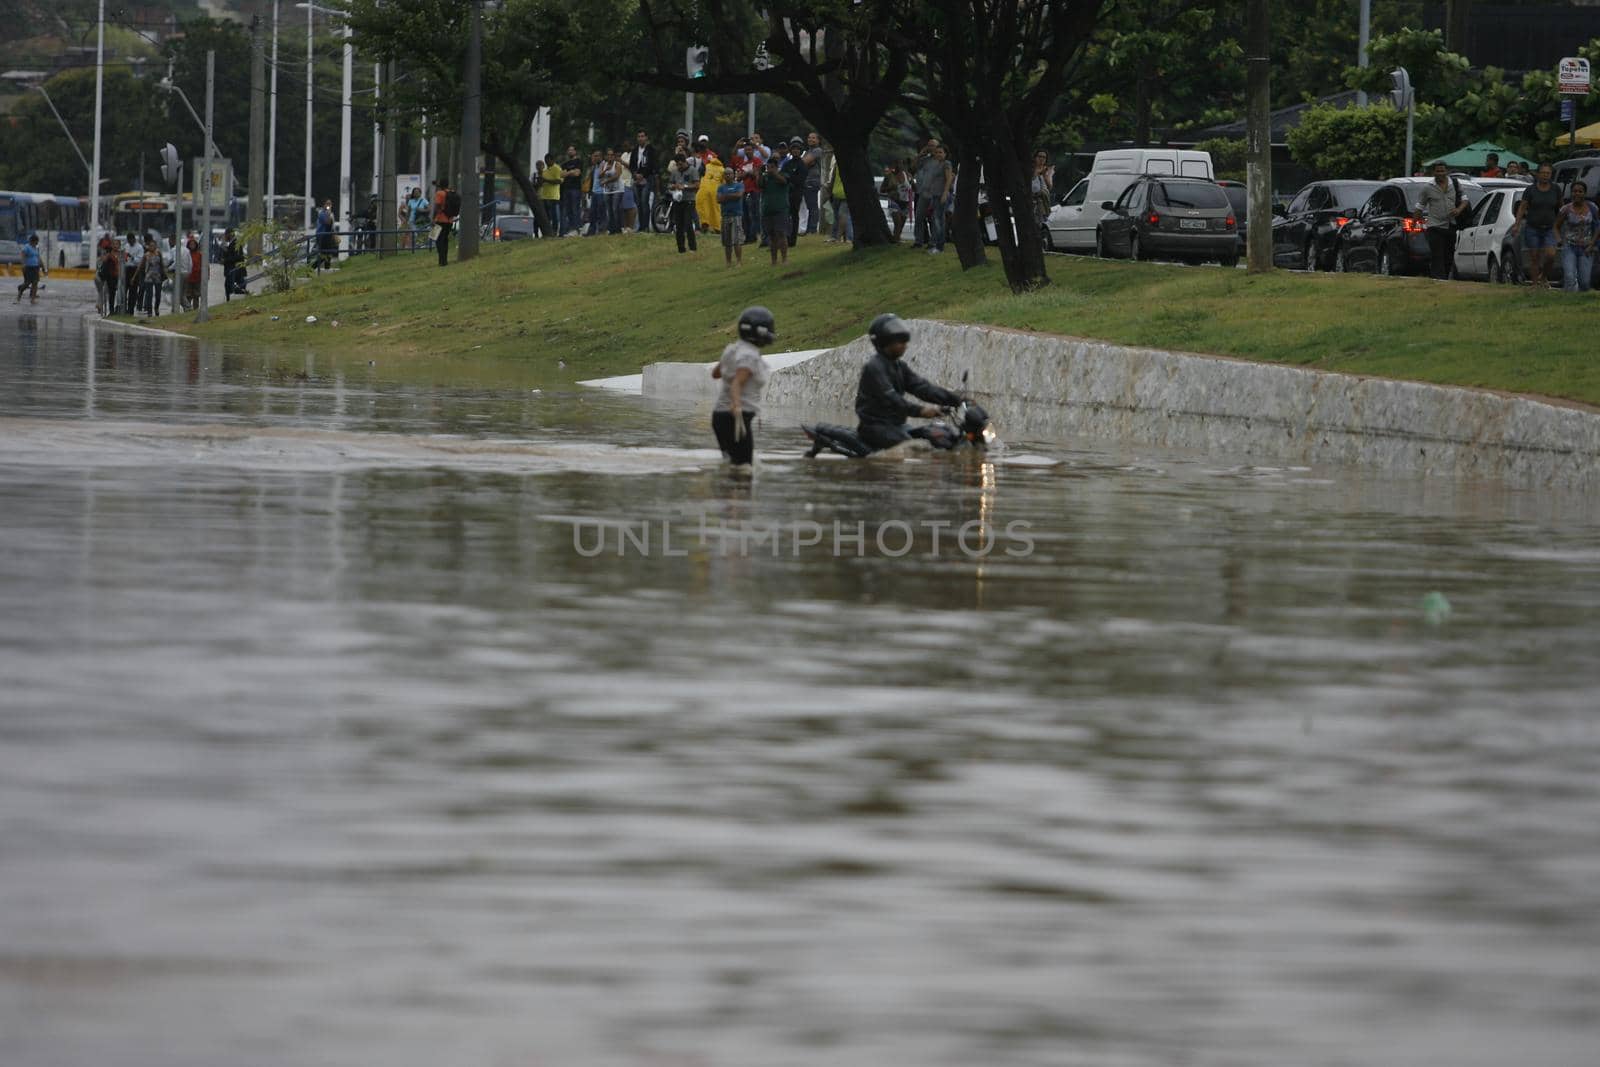 salvador, bahia, brazil - april 9, 2015: vehicle is seen on a street flooded due to rain in Salvador city.